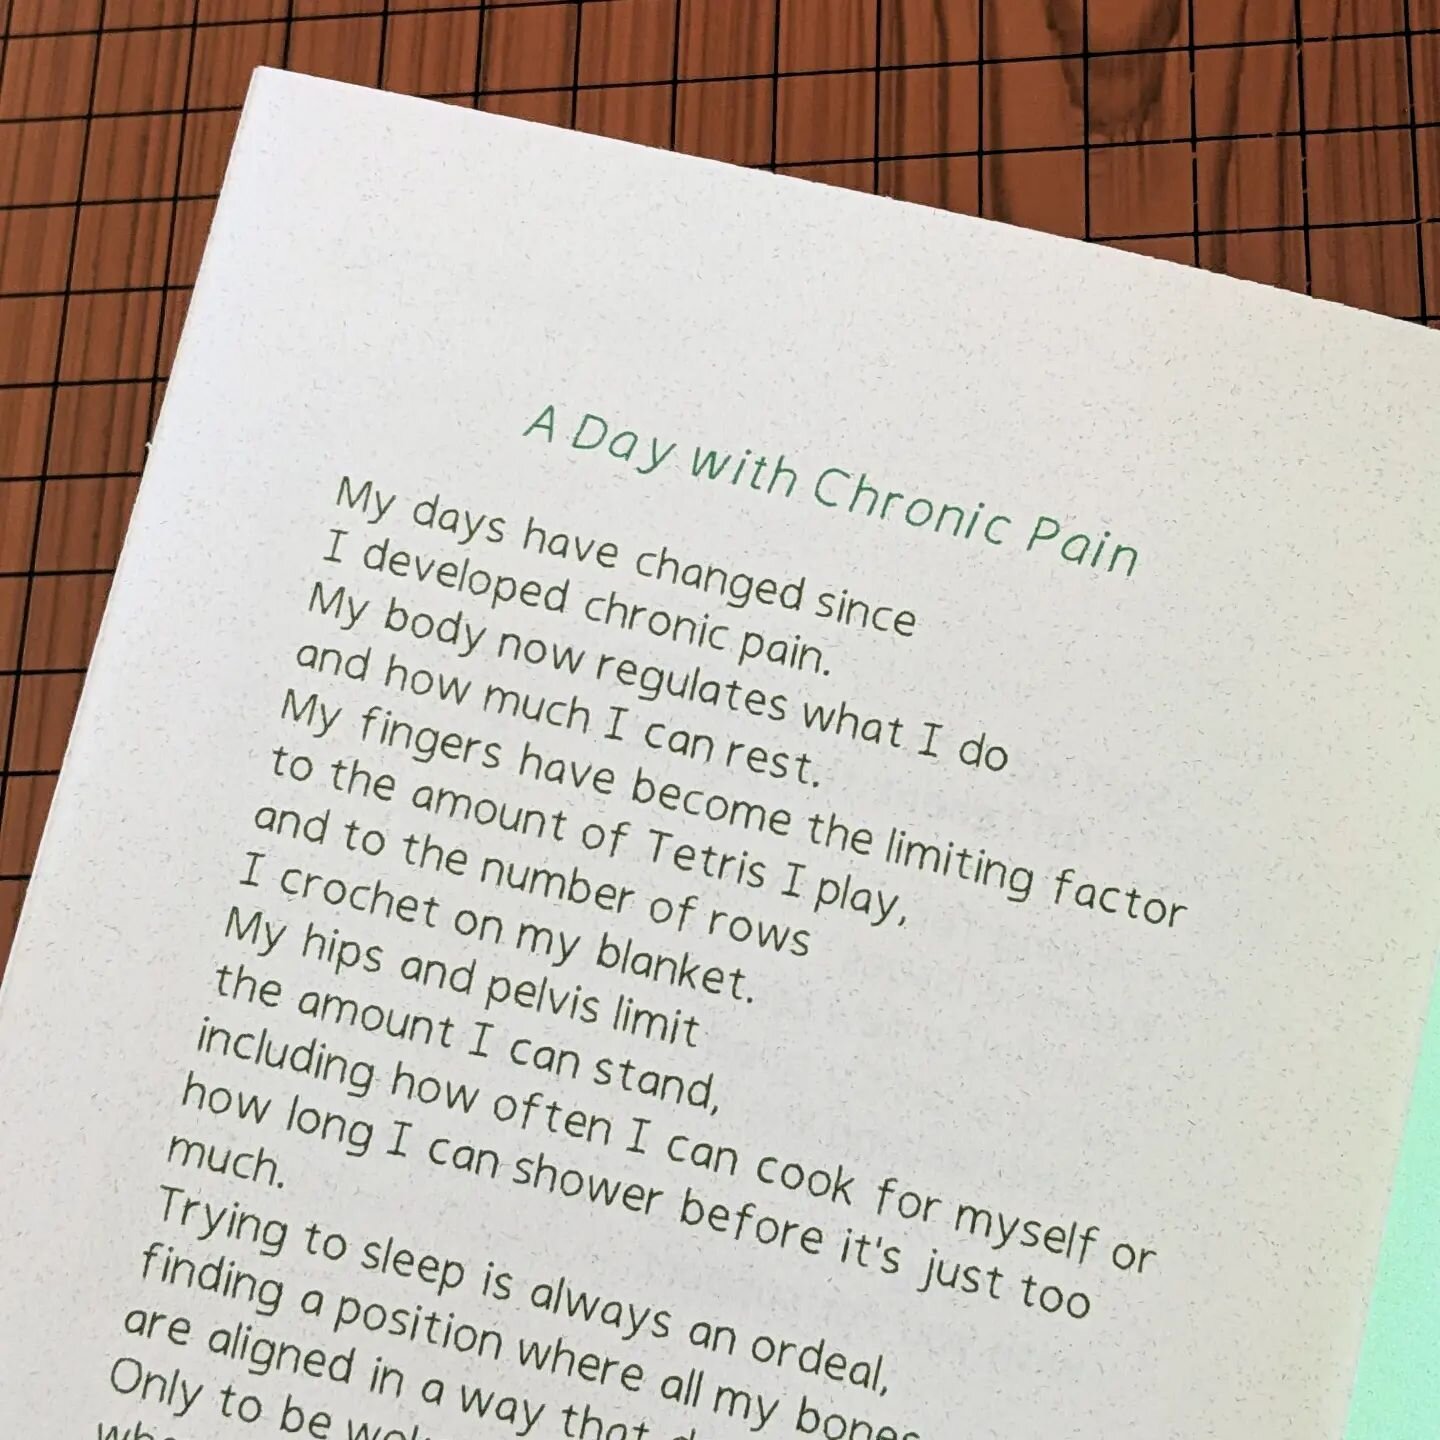 Some more of &quot;Chronically Invisible&quot; 📗 Link in our bio to get a print or digital copy !!

#chronicillness #invisibleillness #invisibledisability #disabilityzine #disabledzinesters #nonbinary #queerartist #zinemaking #zines #poetry #writing